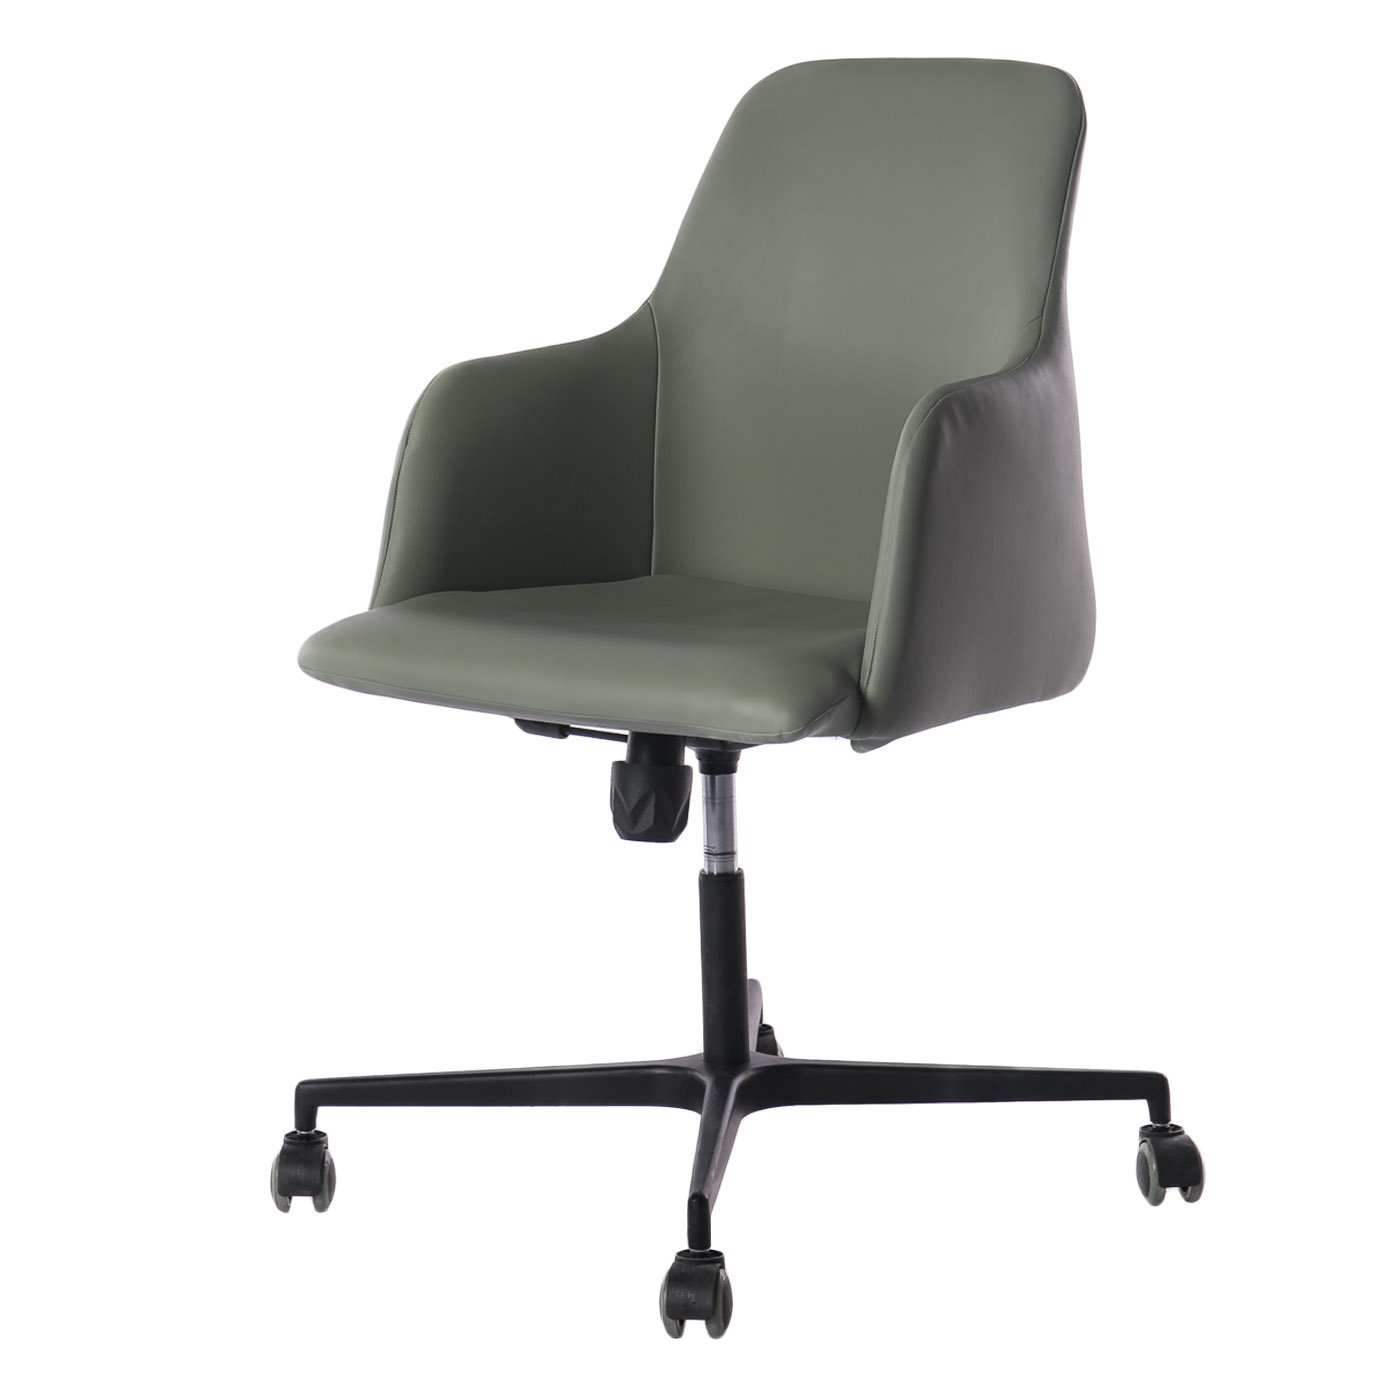 St. Pauli Faux Leather Work Chair